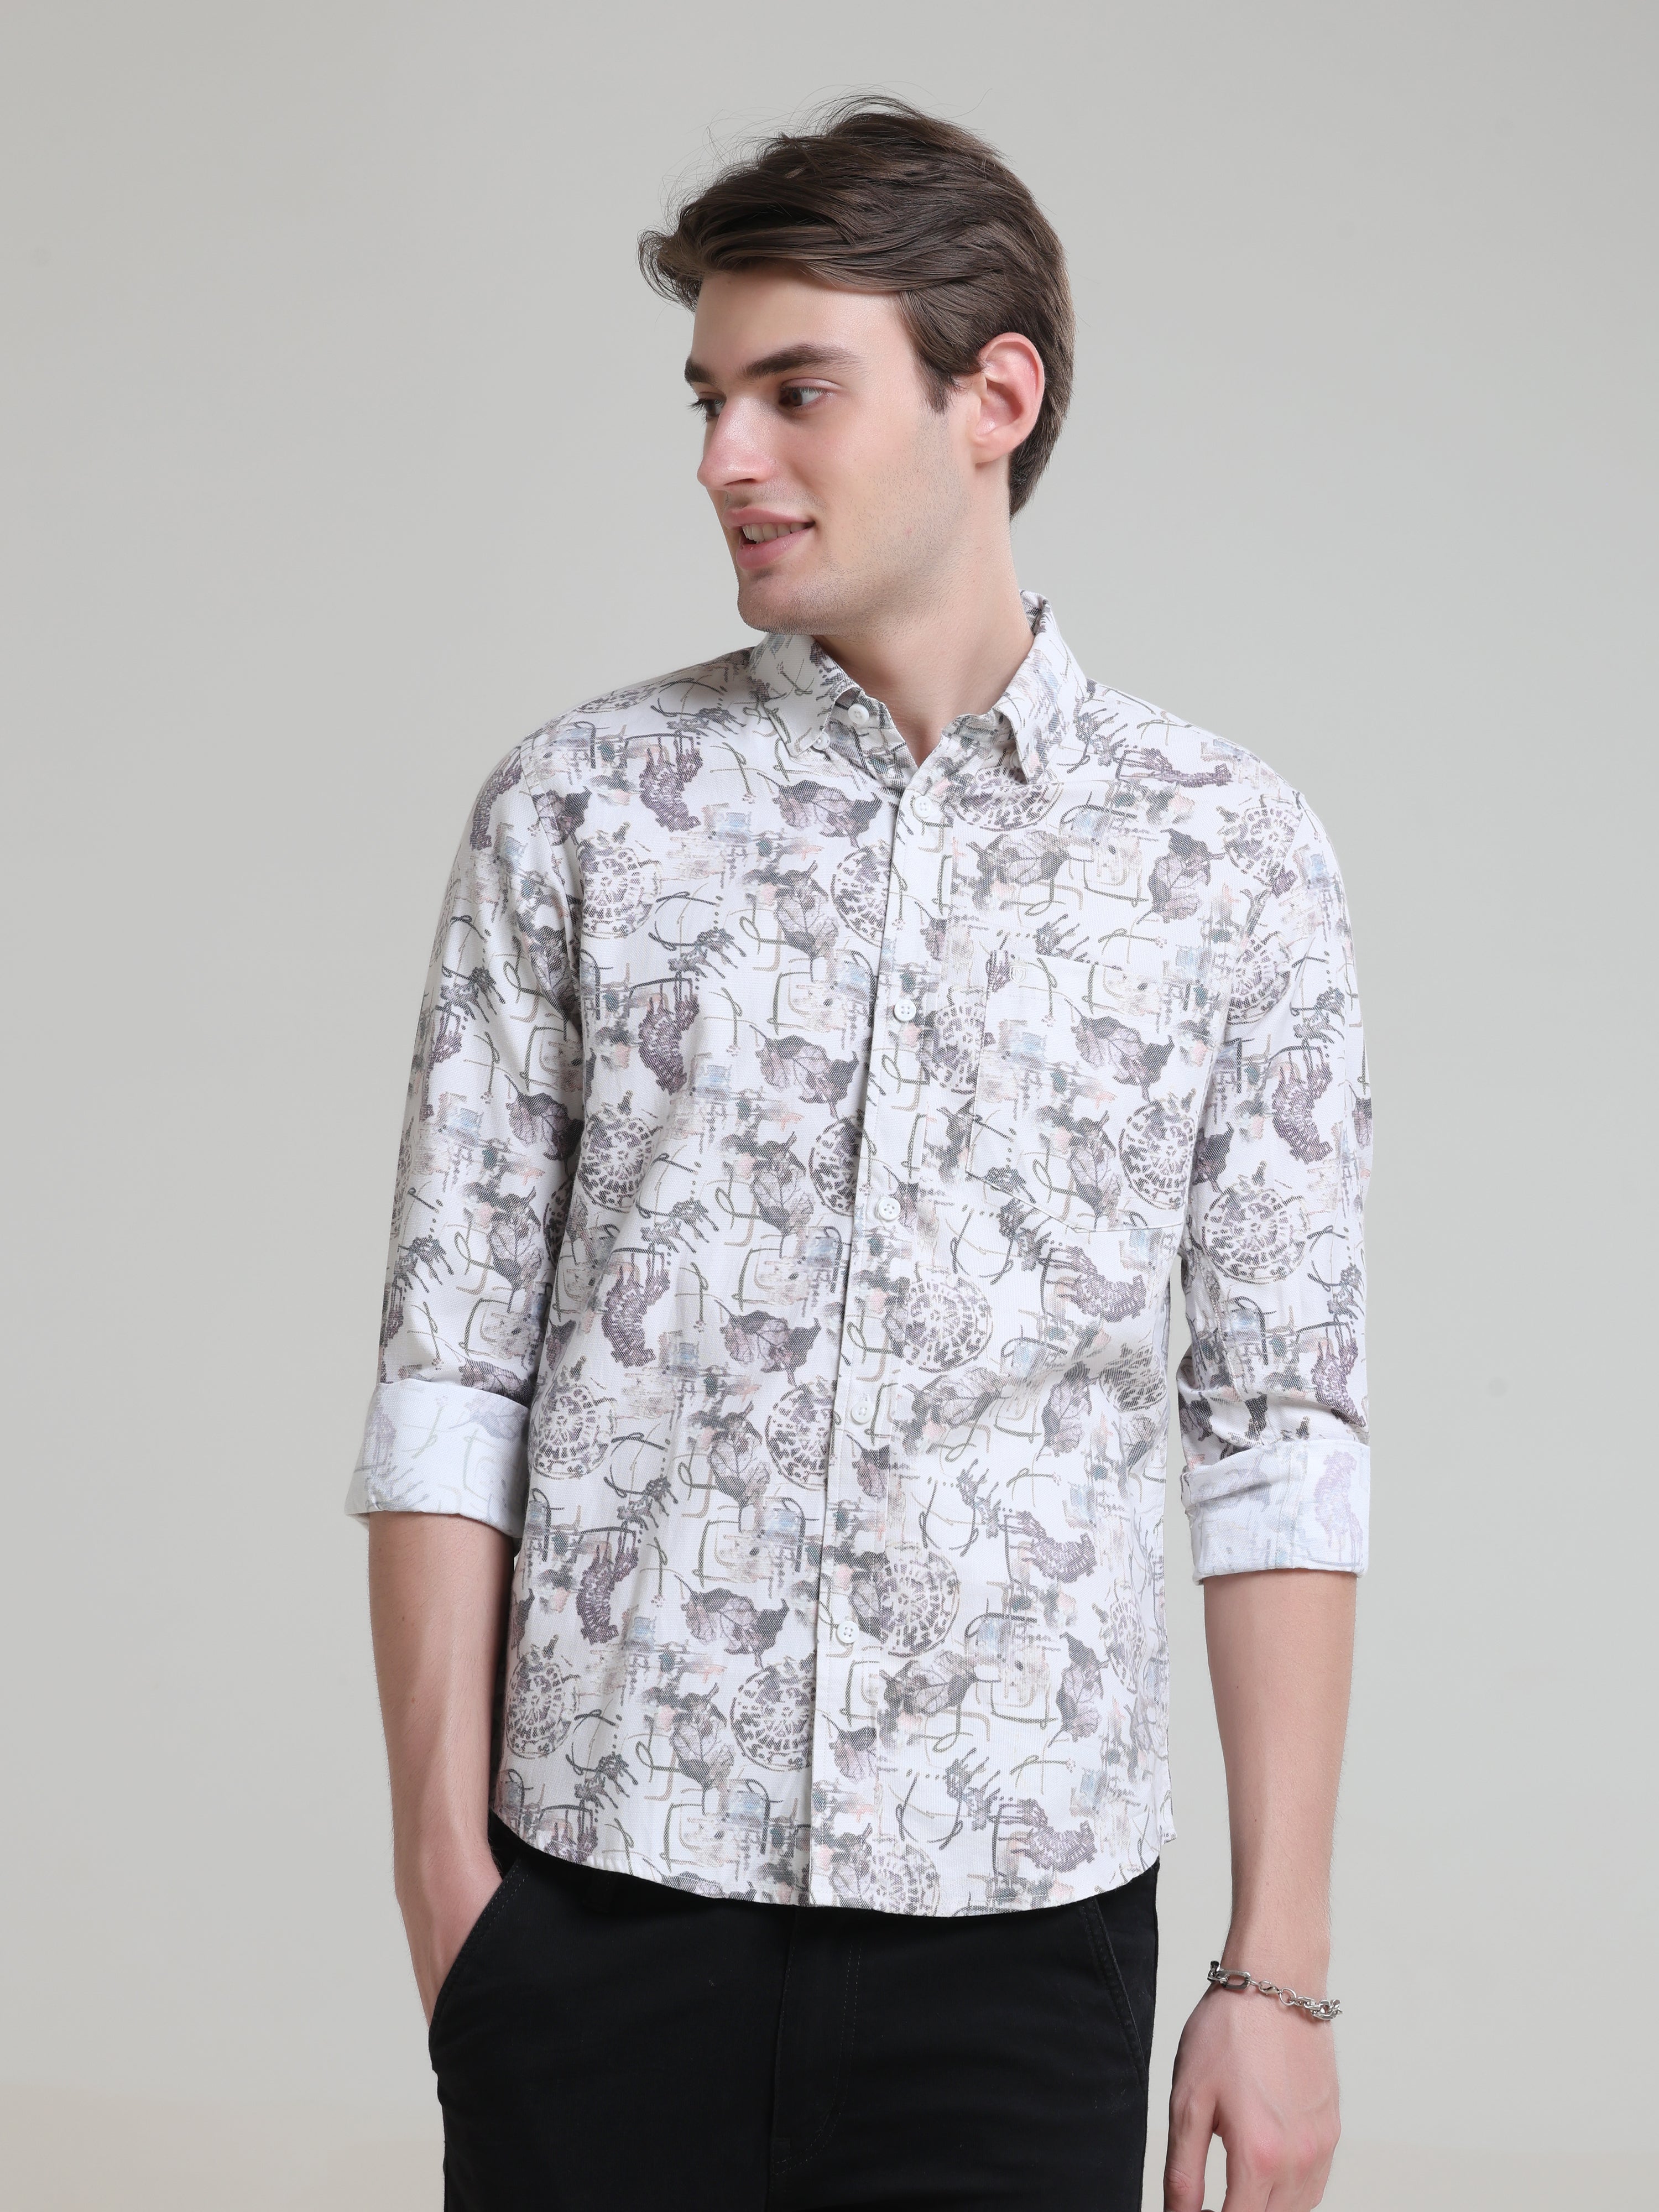 Shop Stylish Vintage Oxford Printed Shirts OnlineRs. 1399.00